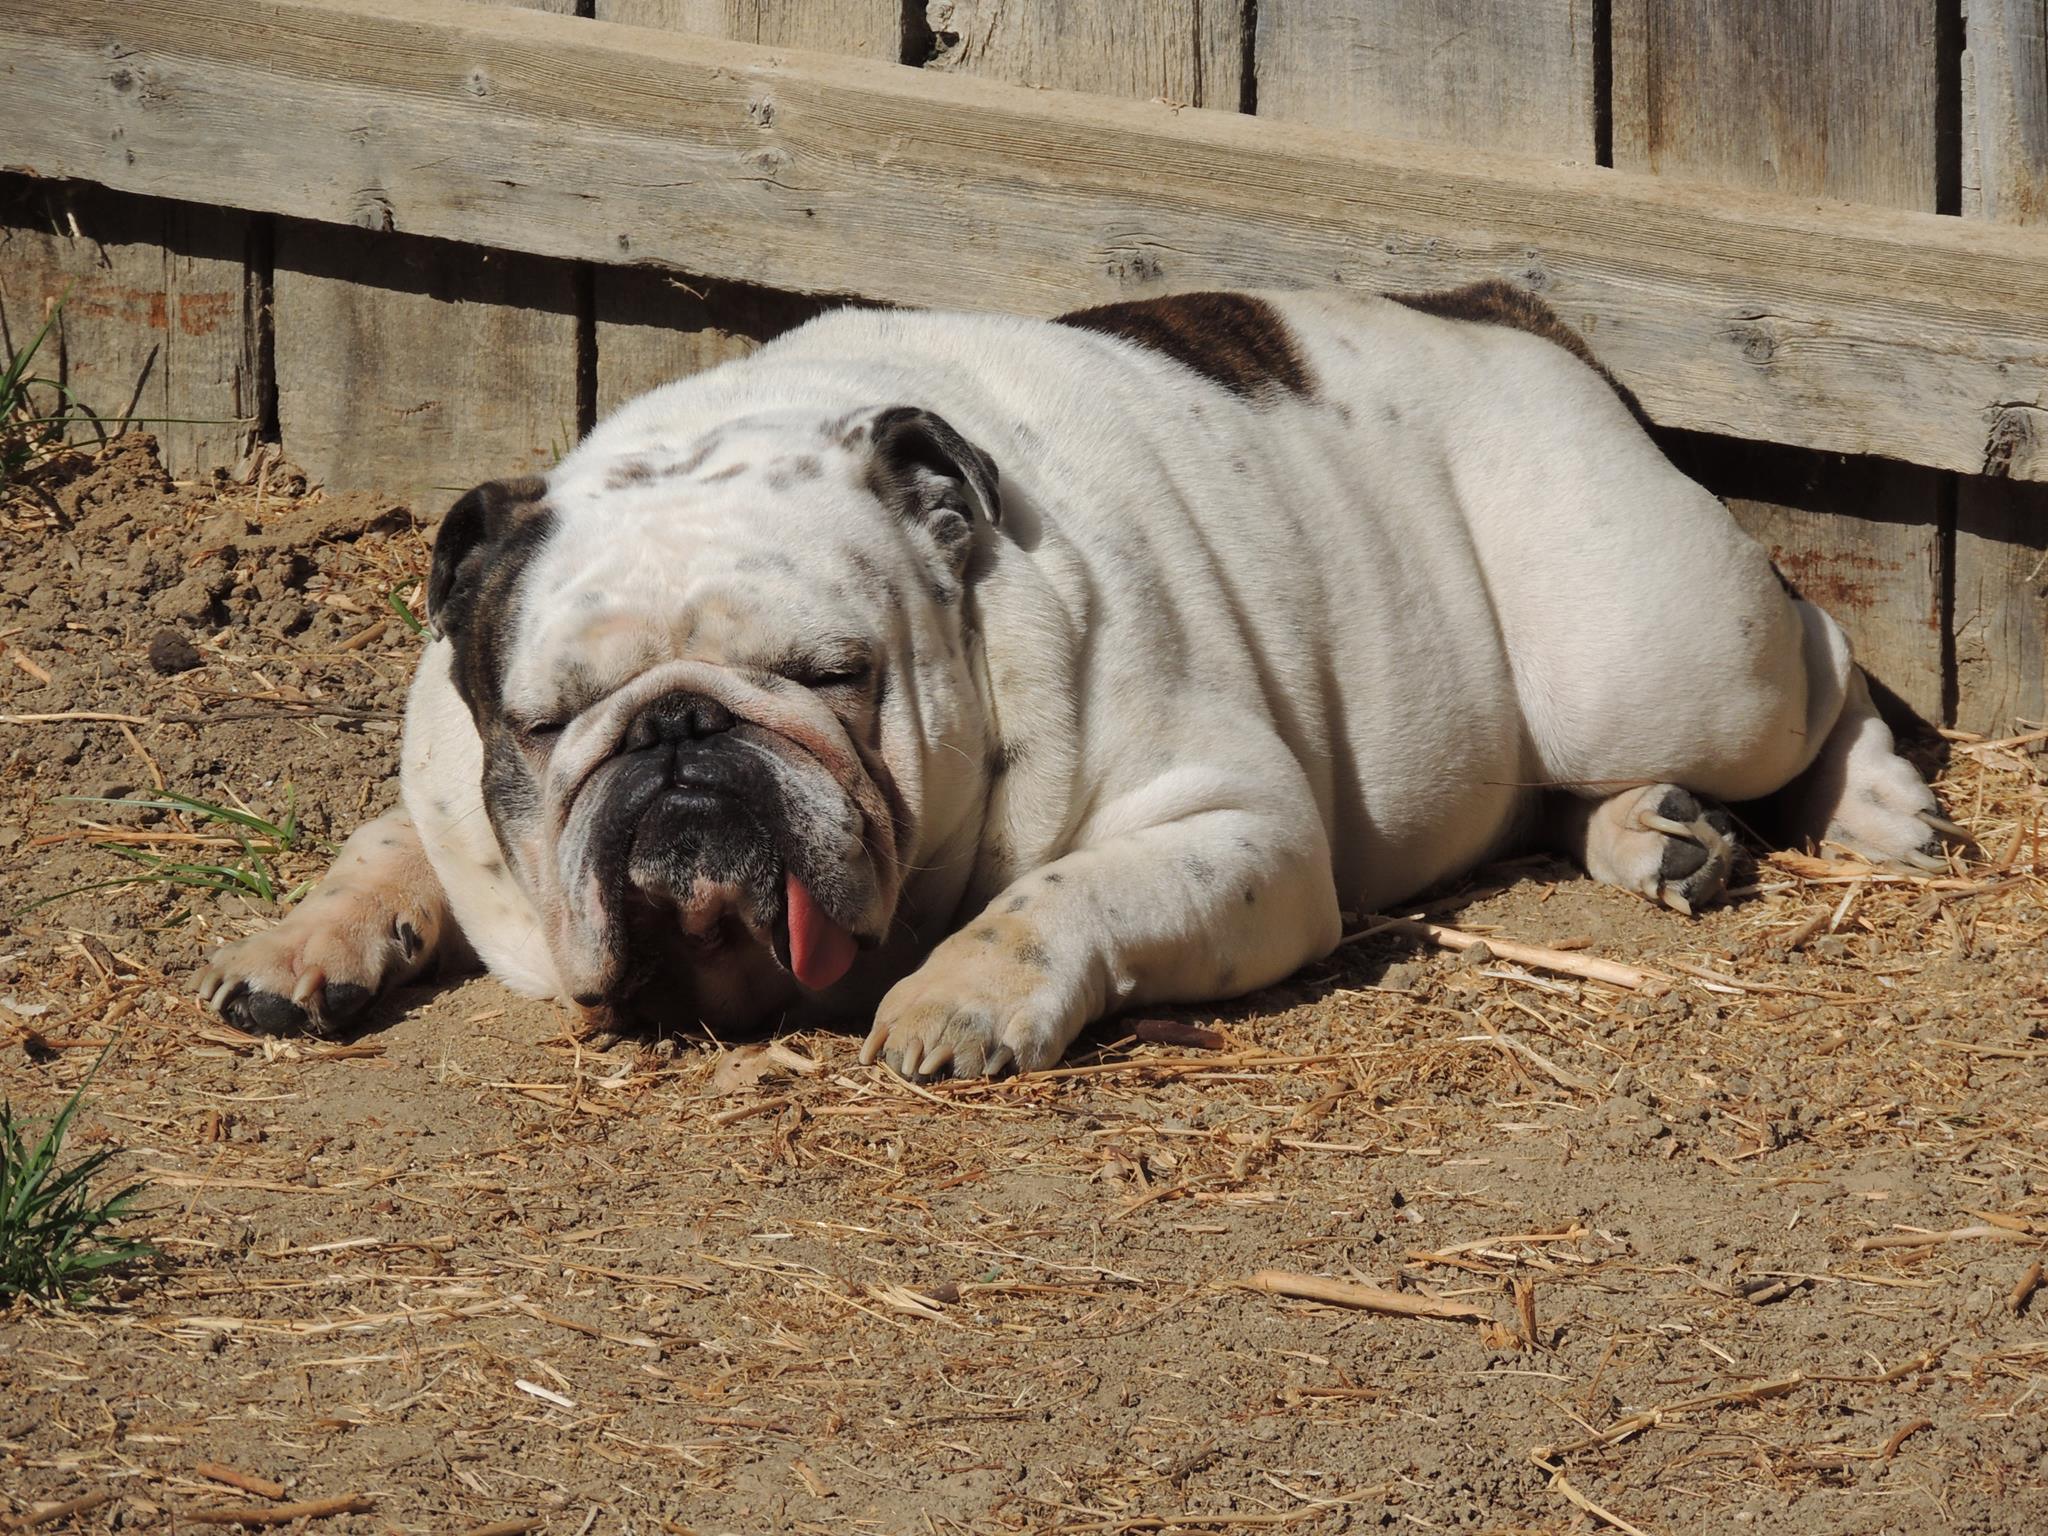 An English Bulldog sleeping on the ground behind the fence and under the sun